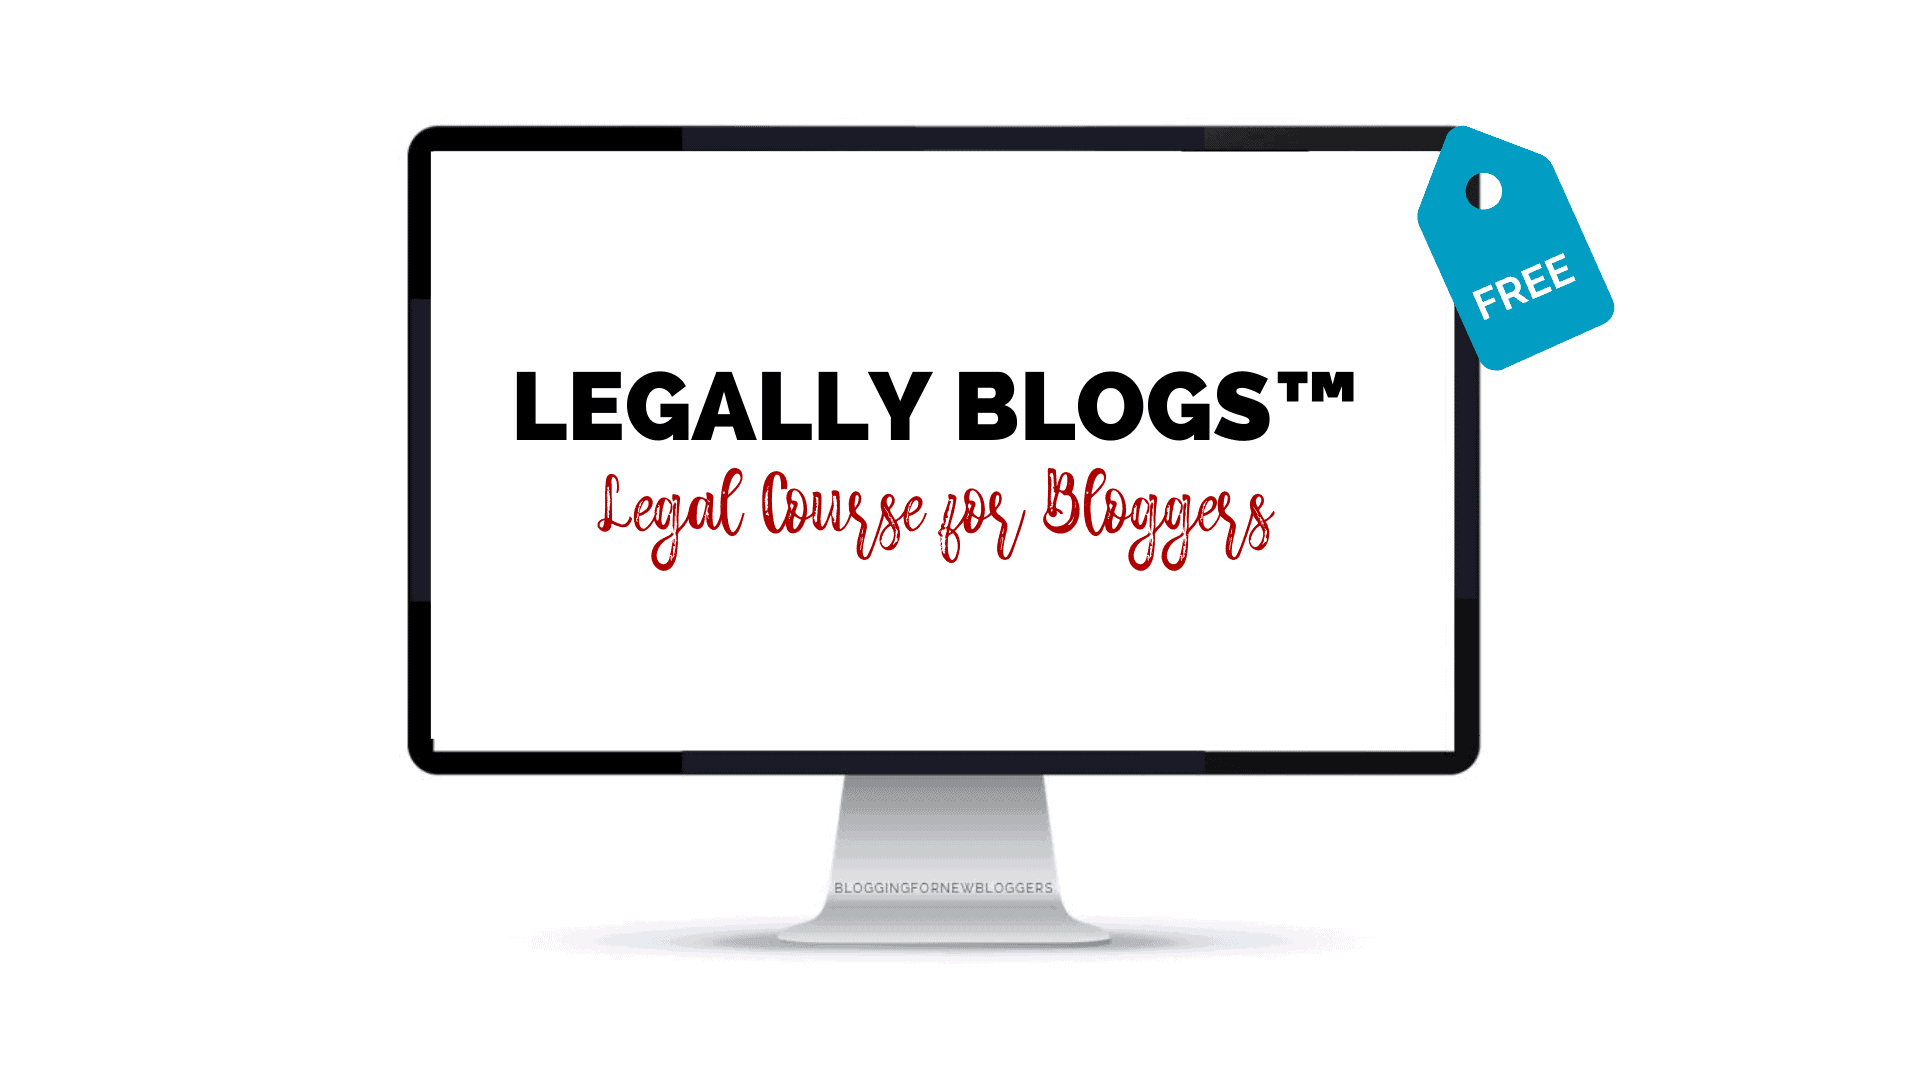 Legally Blogs